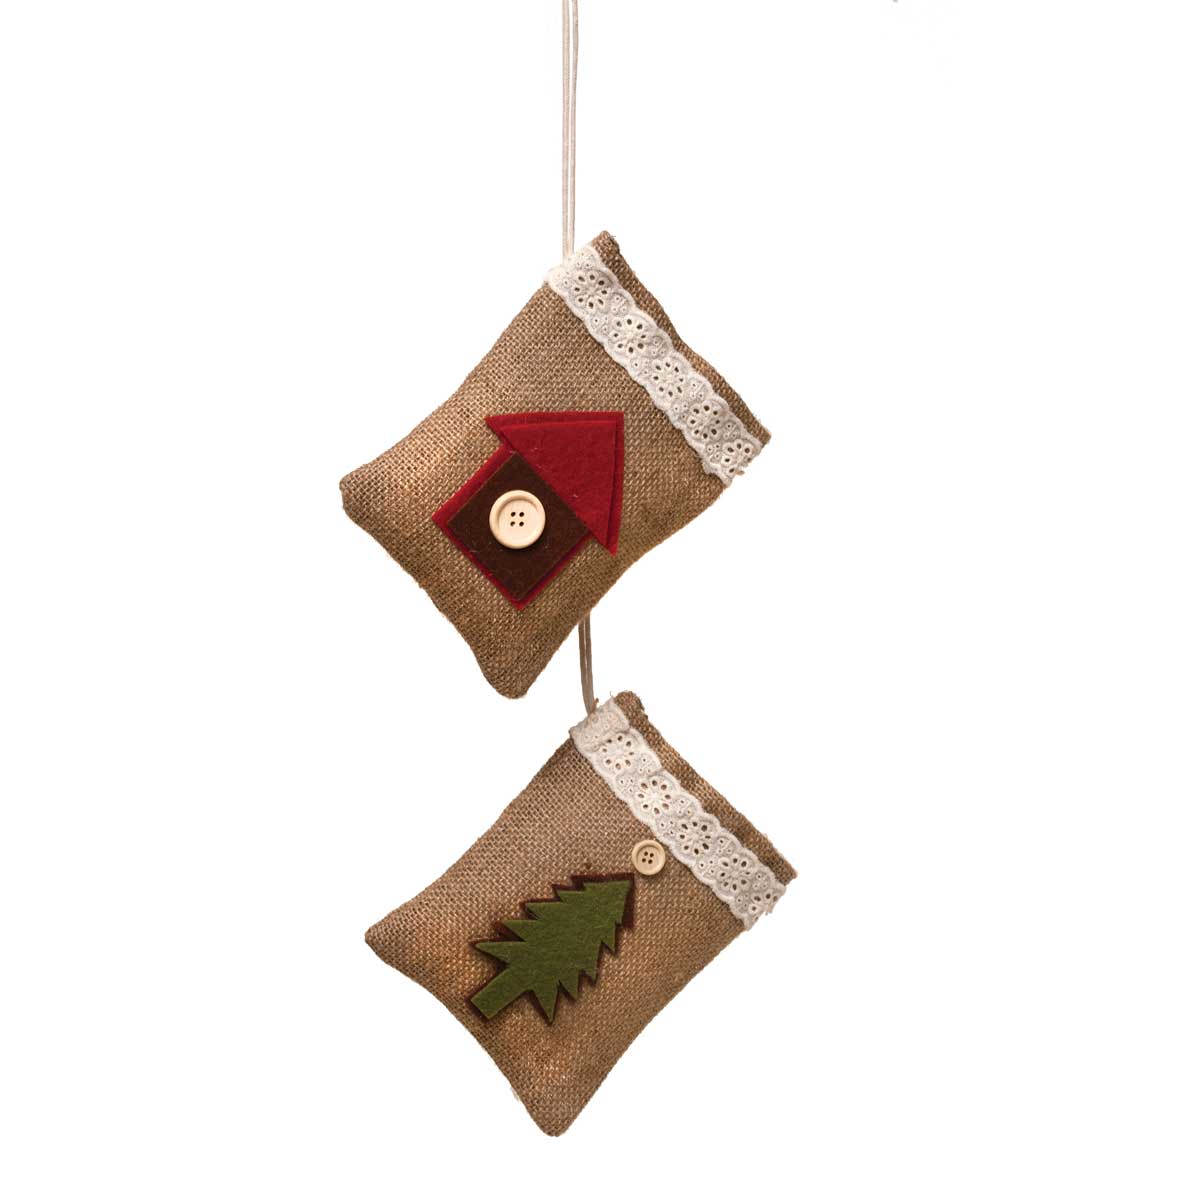 BURLAP BAG WITH BUTTON SET OF 2 HOUSE/TREE